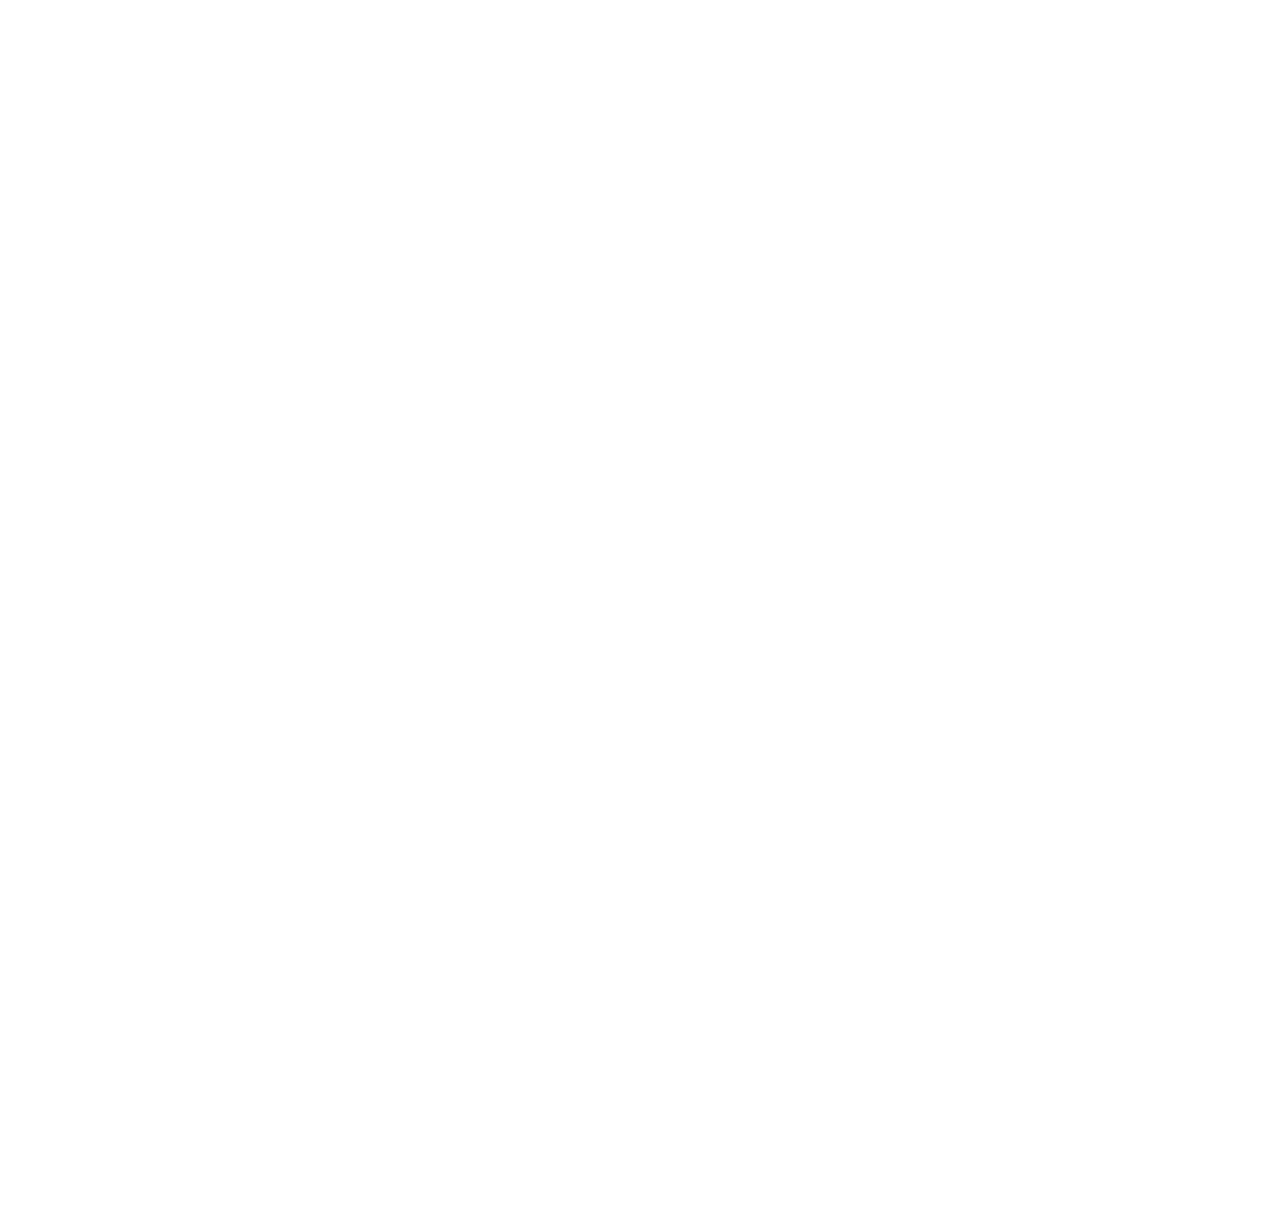 CROSS YOUR PAWS's logo